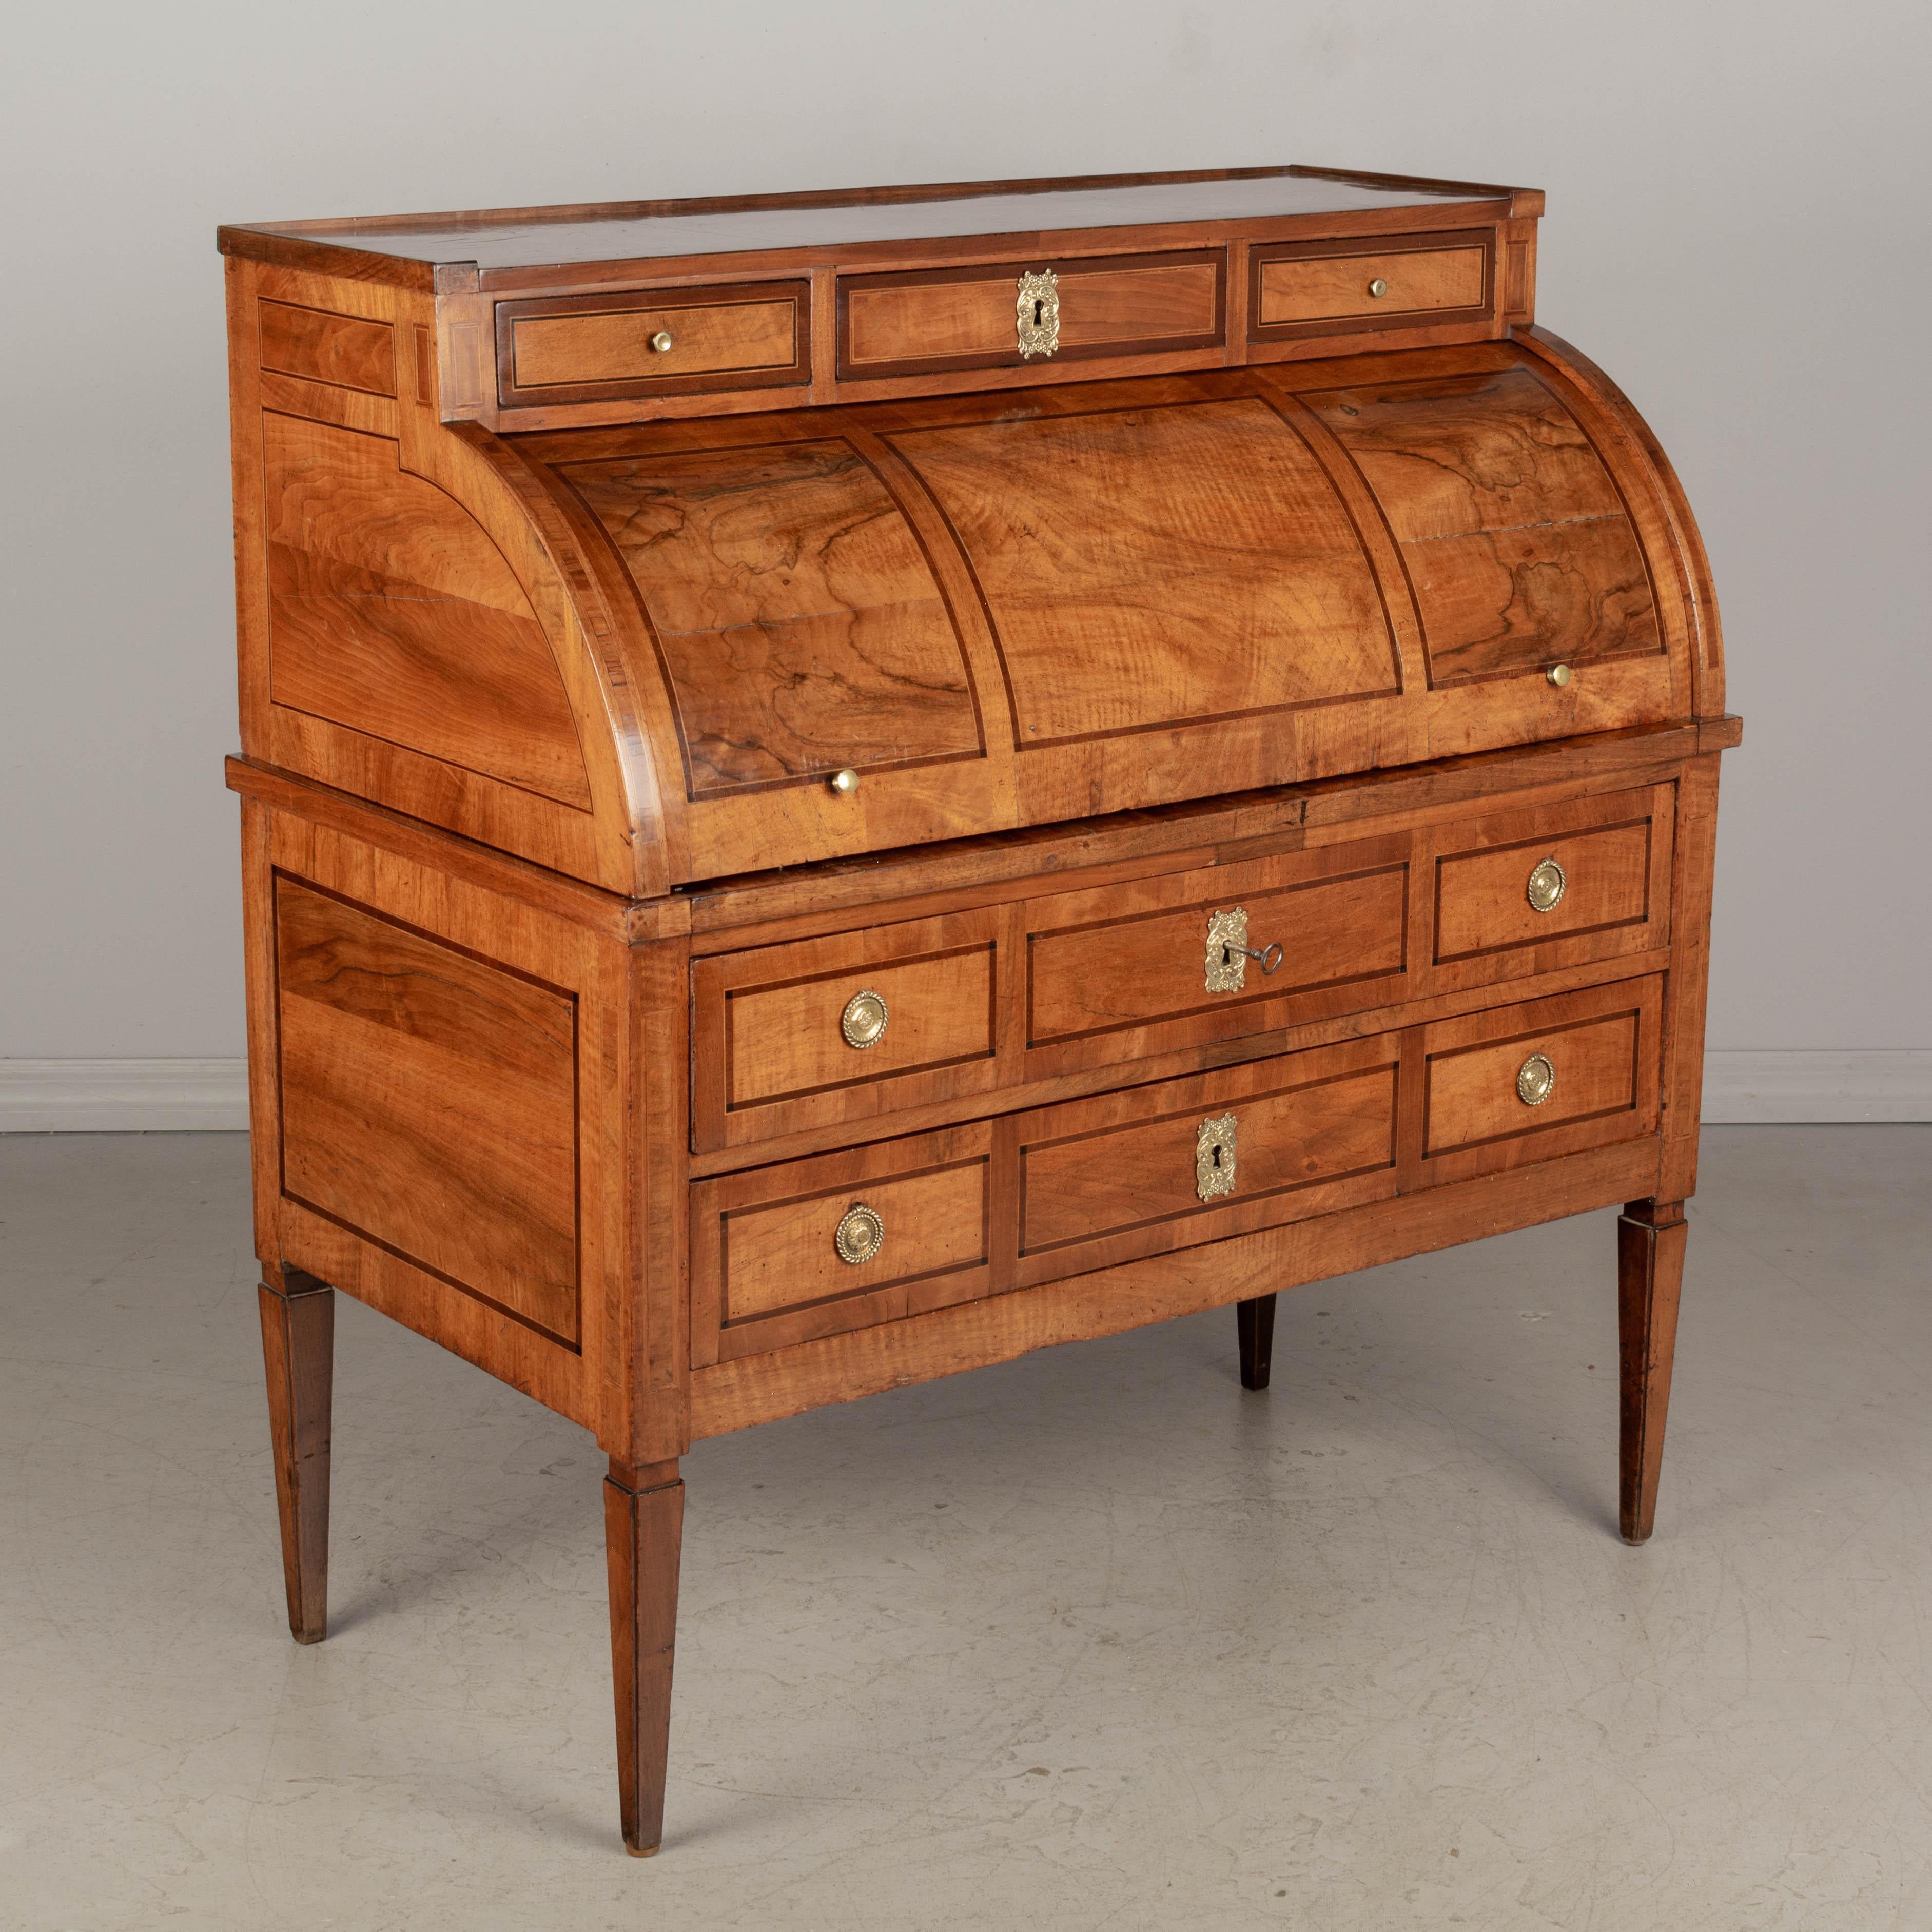 A fine 18th century Louis XVI period bureau à cylindre, or roll top desk, made of solid walnut with marquetry veneers of walnut, mahogany and cherry. Pine as a secondary wood. The surface of the cylinder has bookmatched walnut veneer and retains a